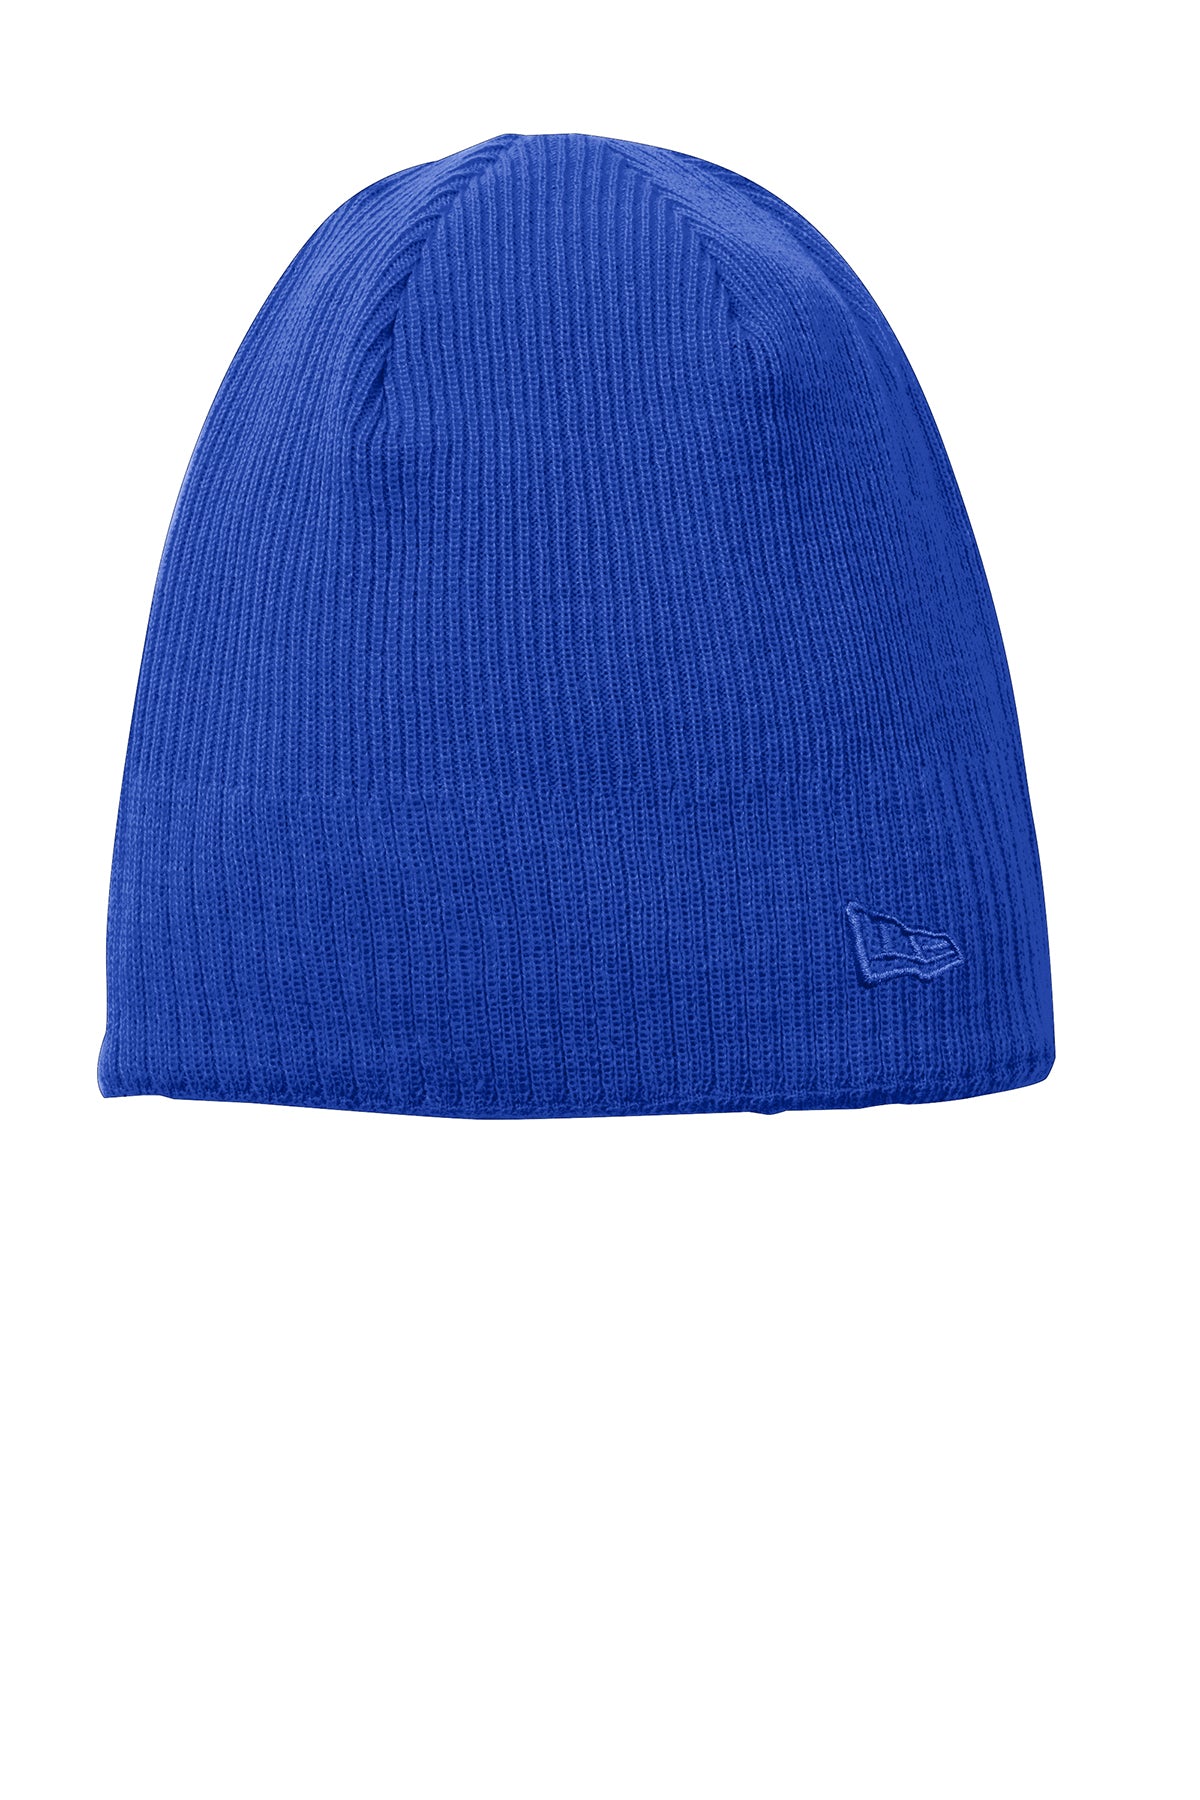 New Era Knit Branded Beanies, Cool Blue